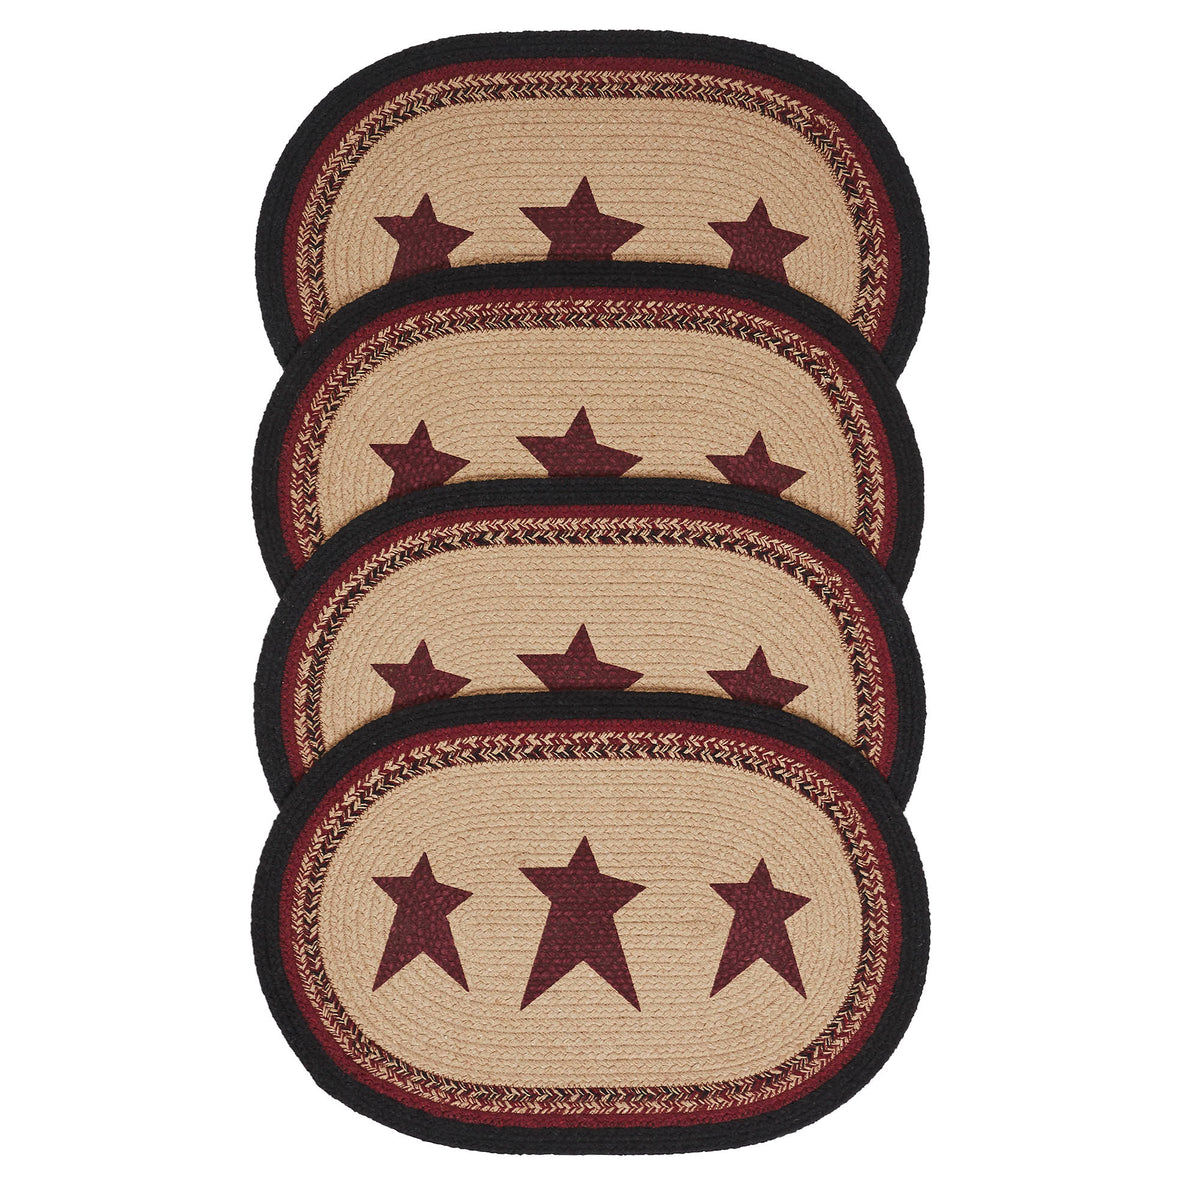 Connell Oval Placemat Stencil Stars Set of 4 13x19